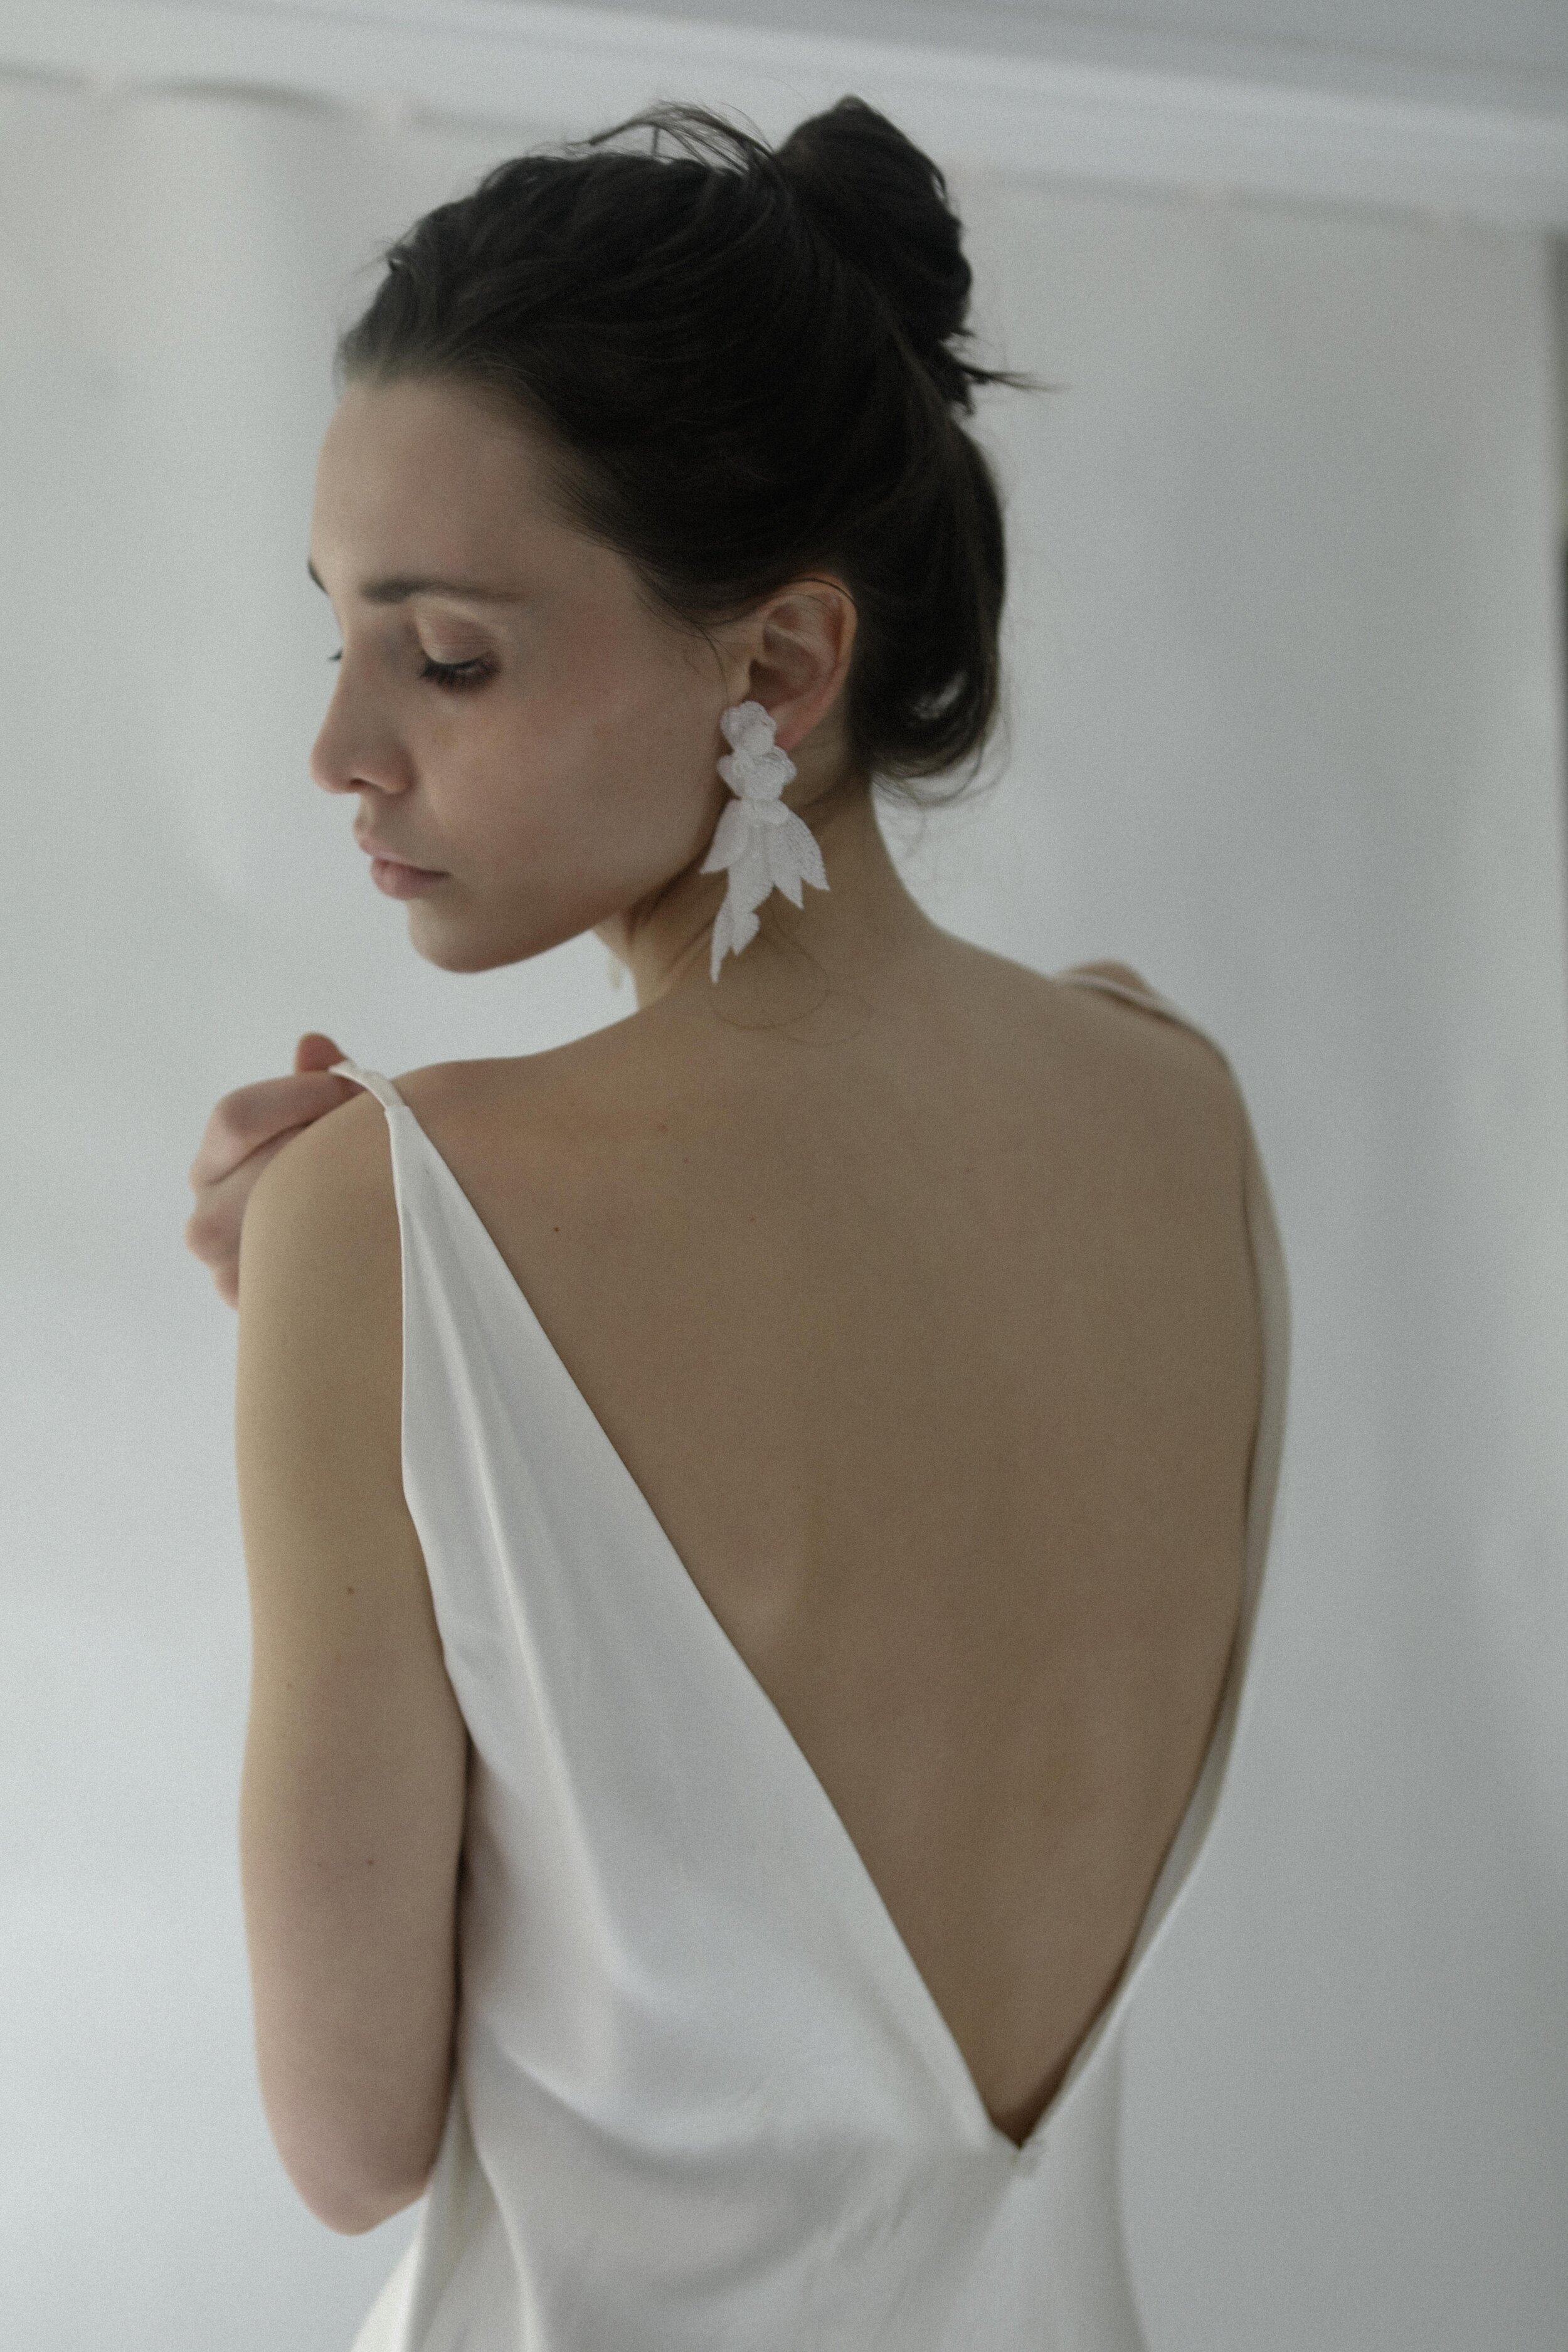 Find the Best Earrings for Your Wedding Dress Neckline